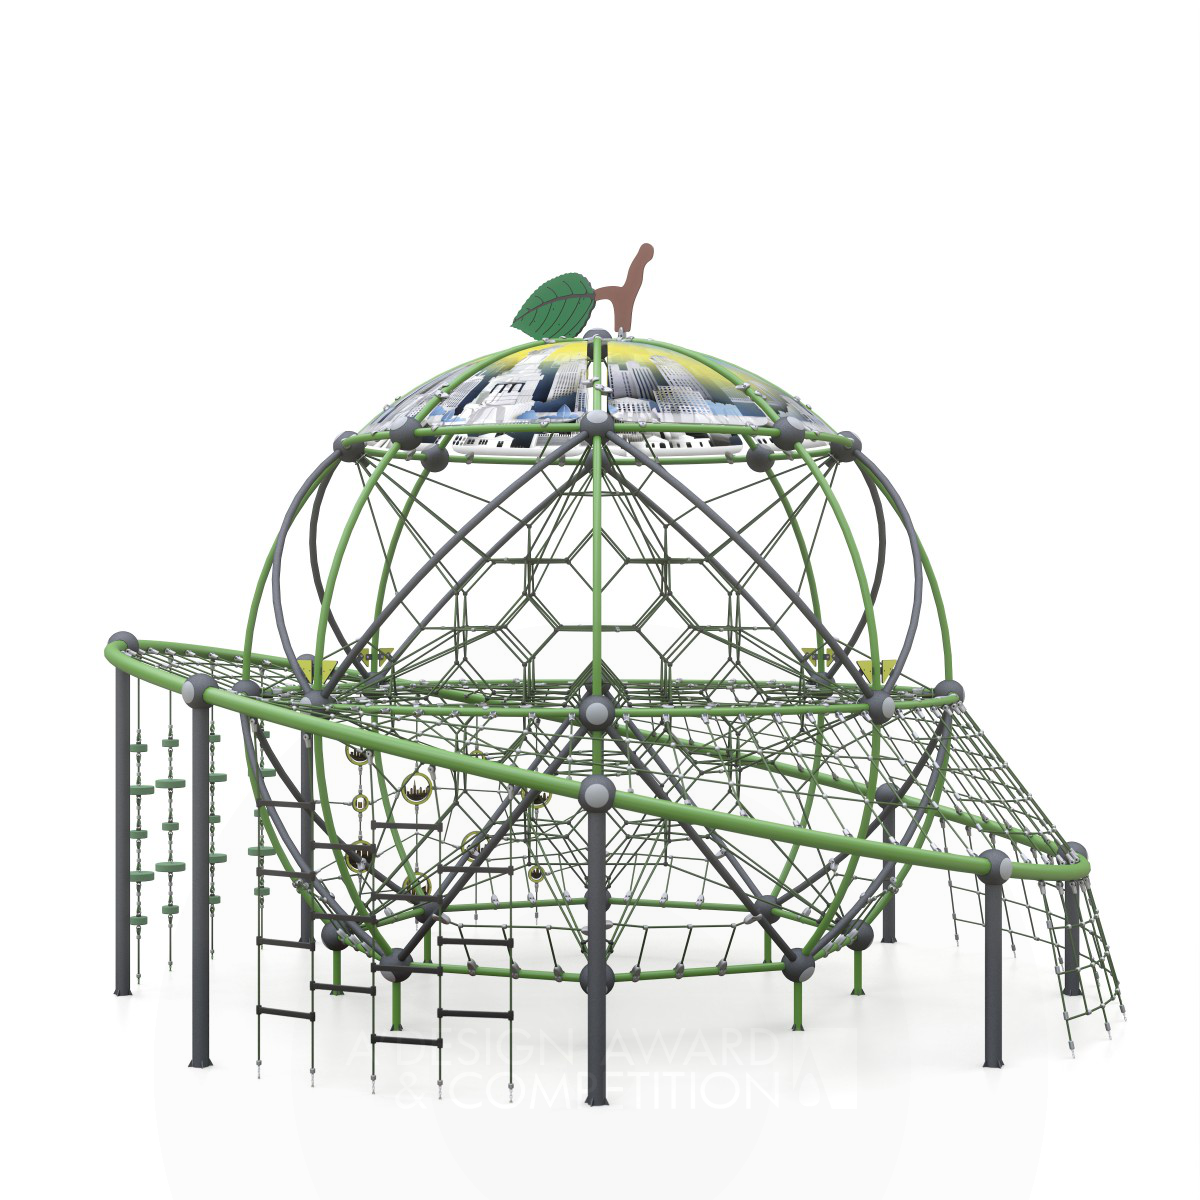 Cemer Playground Equipments wins Iron at the prestigious A' Playground Equipment, Play Structures and Public Park Design Award with New York Play Unit .